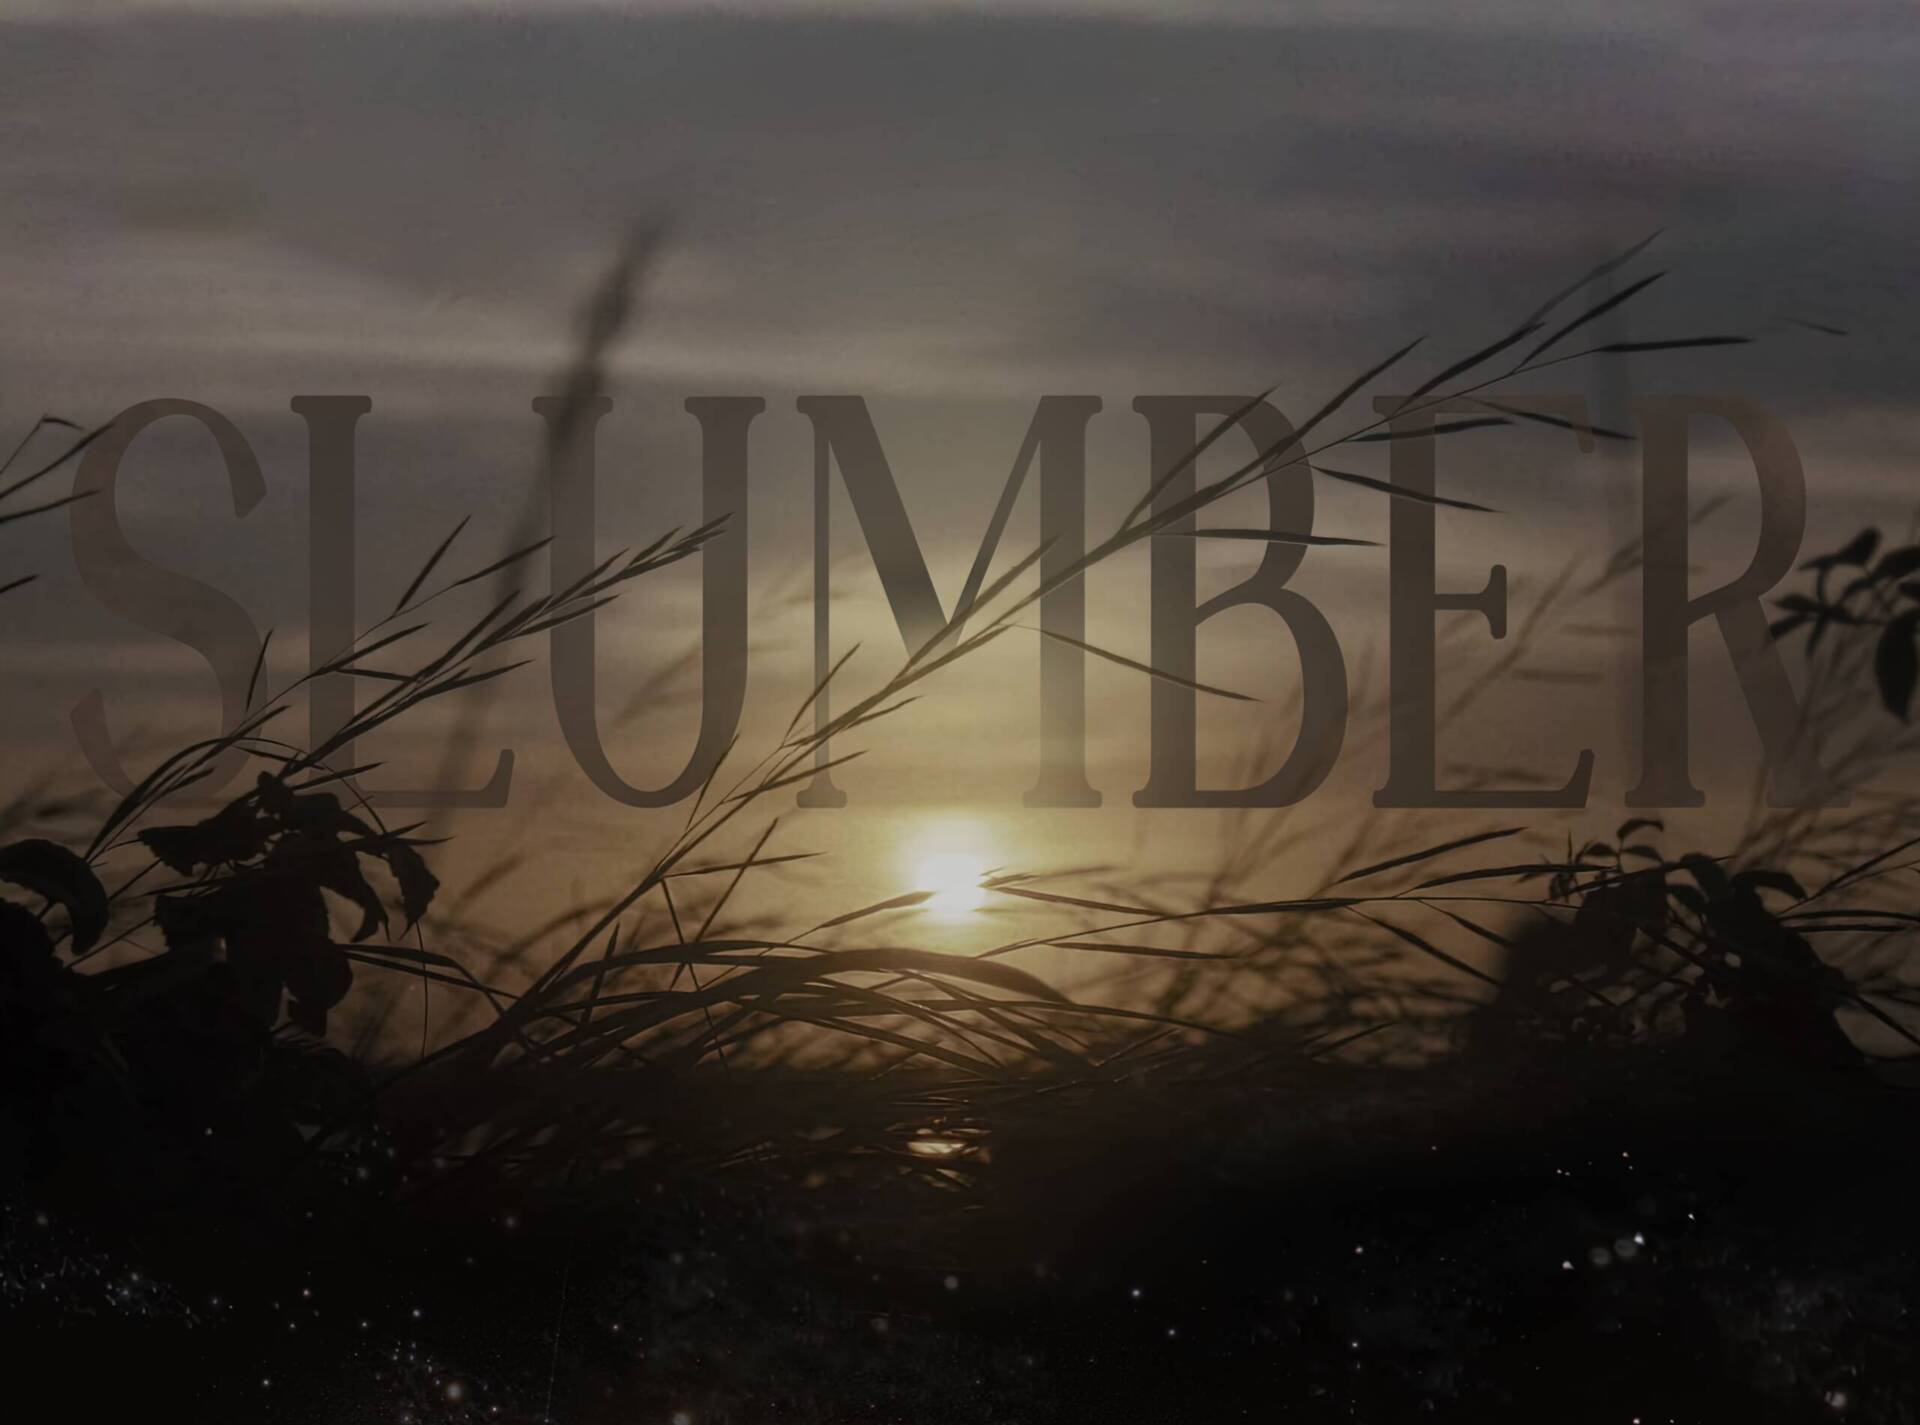 Cydemind unveils new music video for Slumber